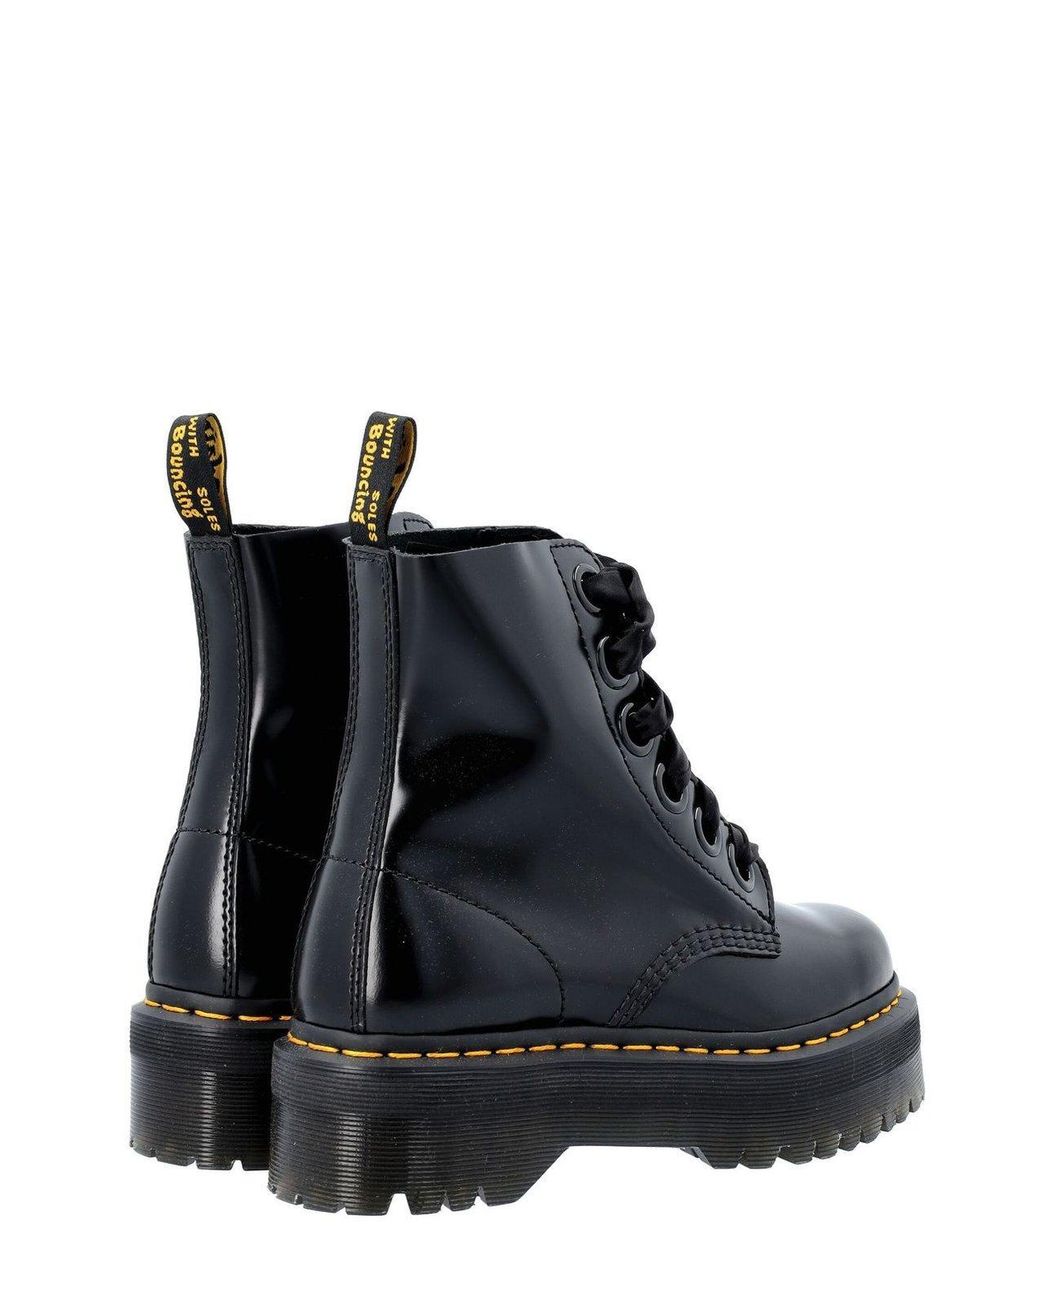 Dr. Martens Molly Platform Lace-up Boots in Black | Lyst